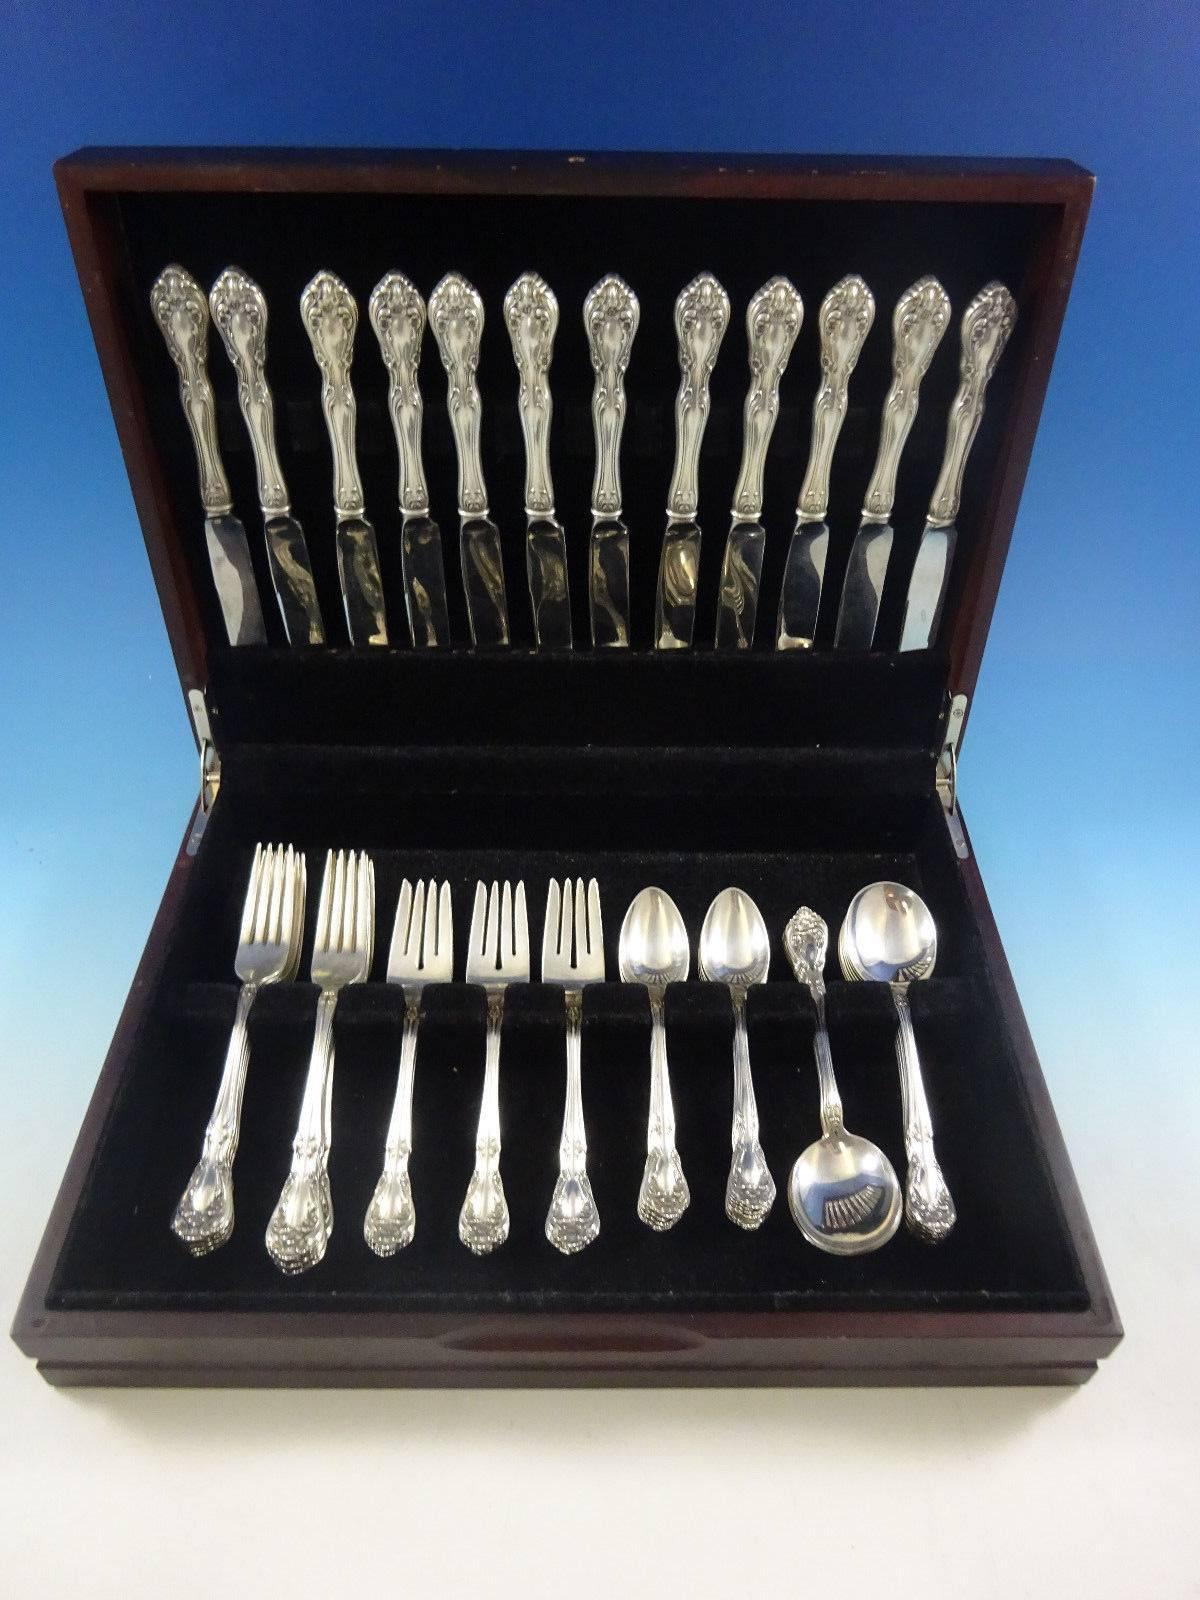 Chateau Rose by Alvin sterling silver Flatware set, 60 pieces. This set includes: 

12 knives, 9